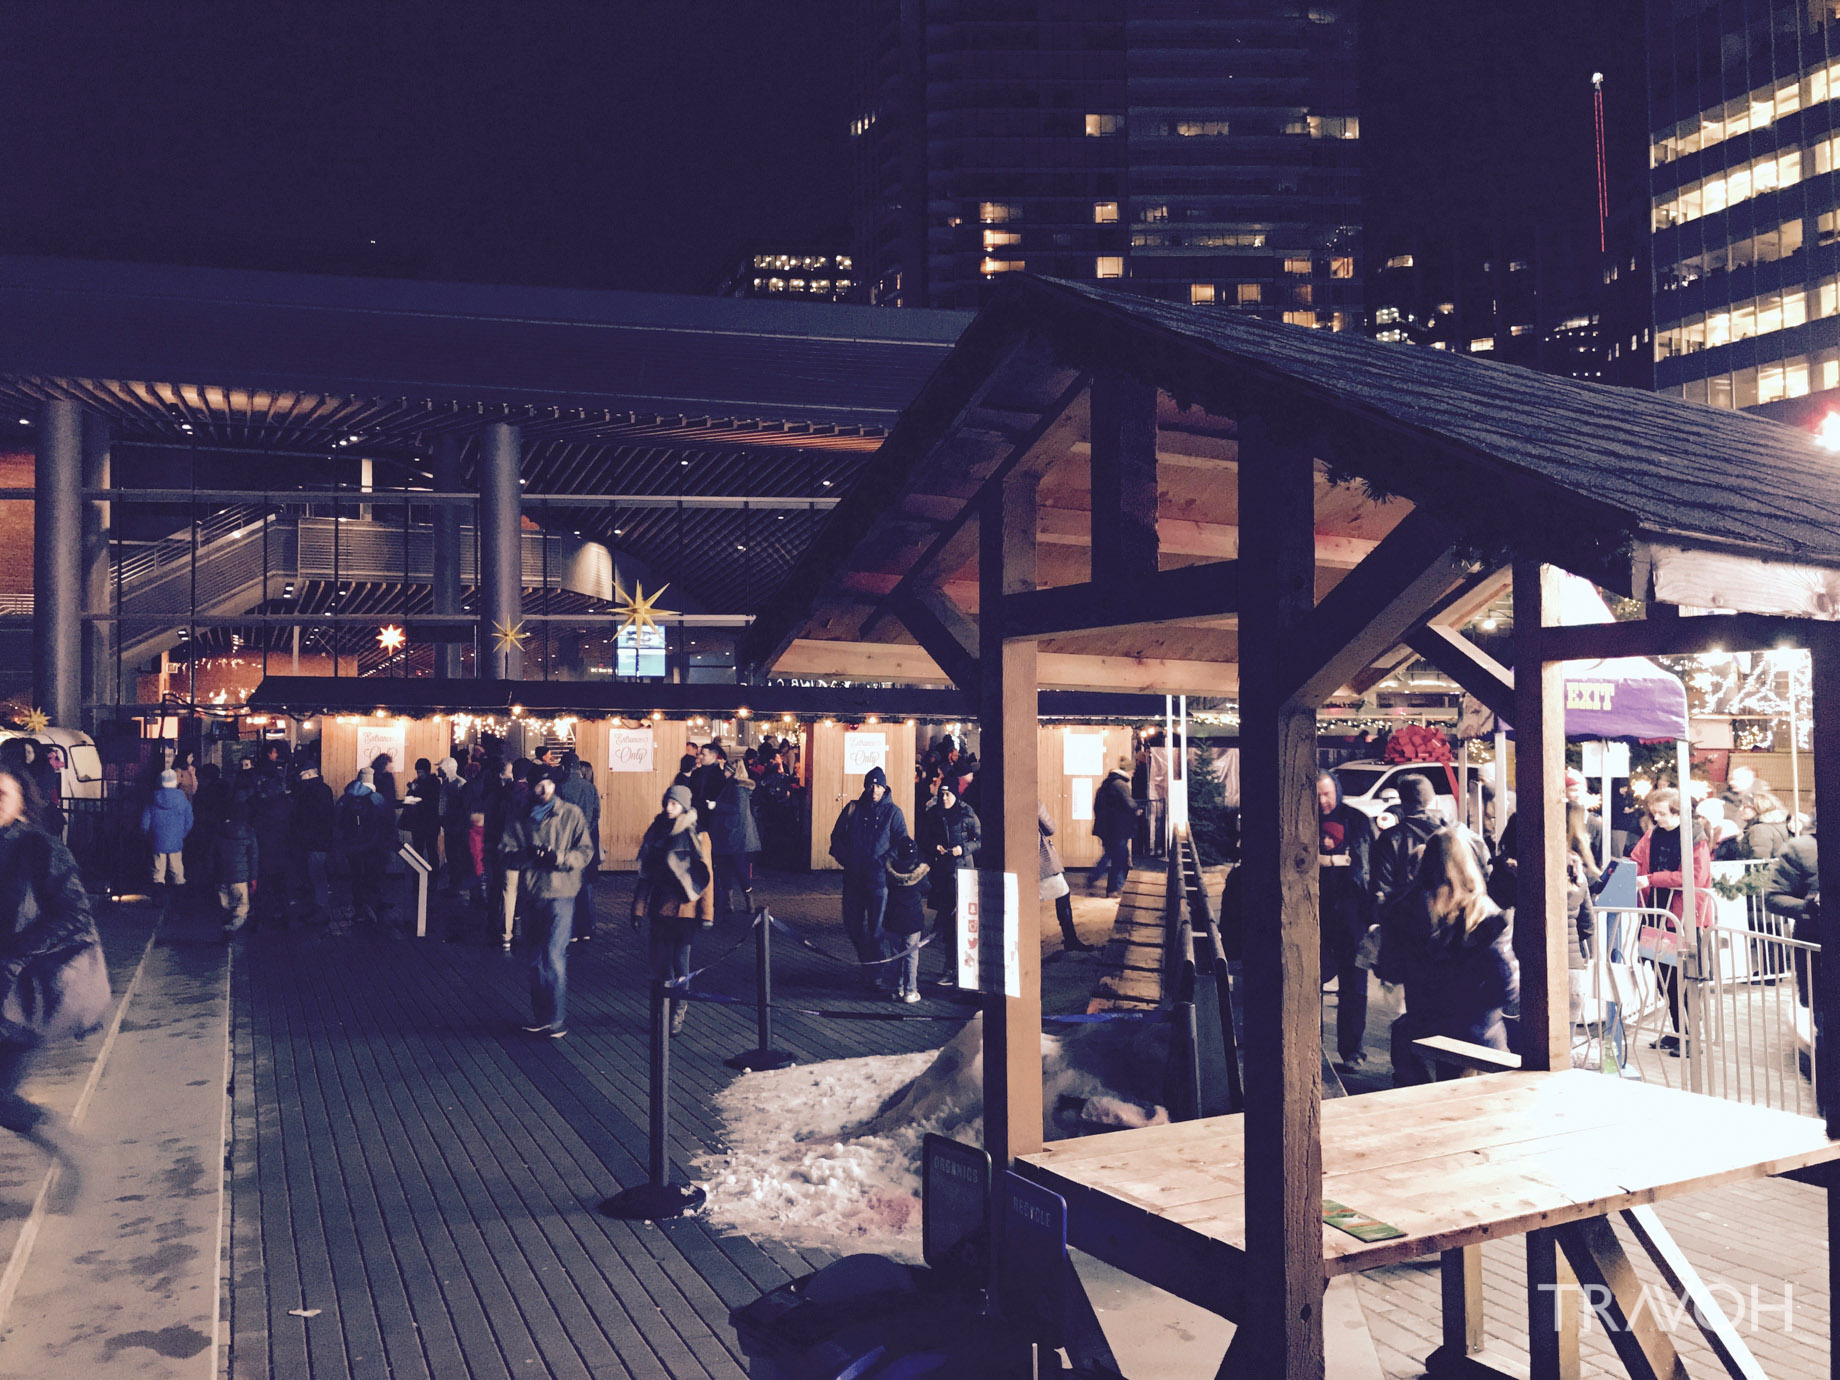 7th Annual Vancouver Christmas Market – A Very Merry German-Inspired Holiday Cheer